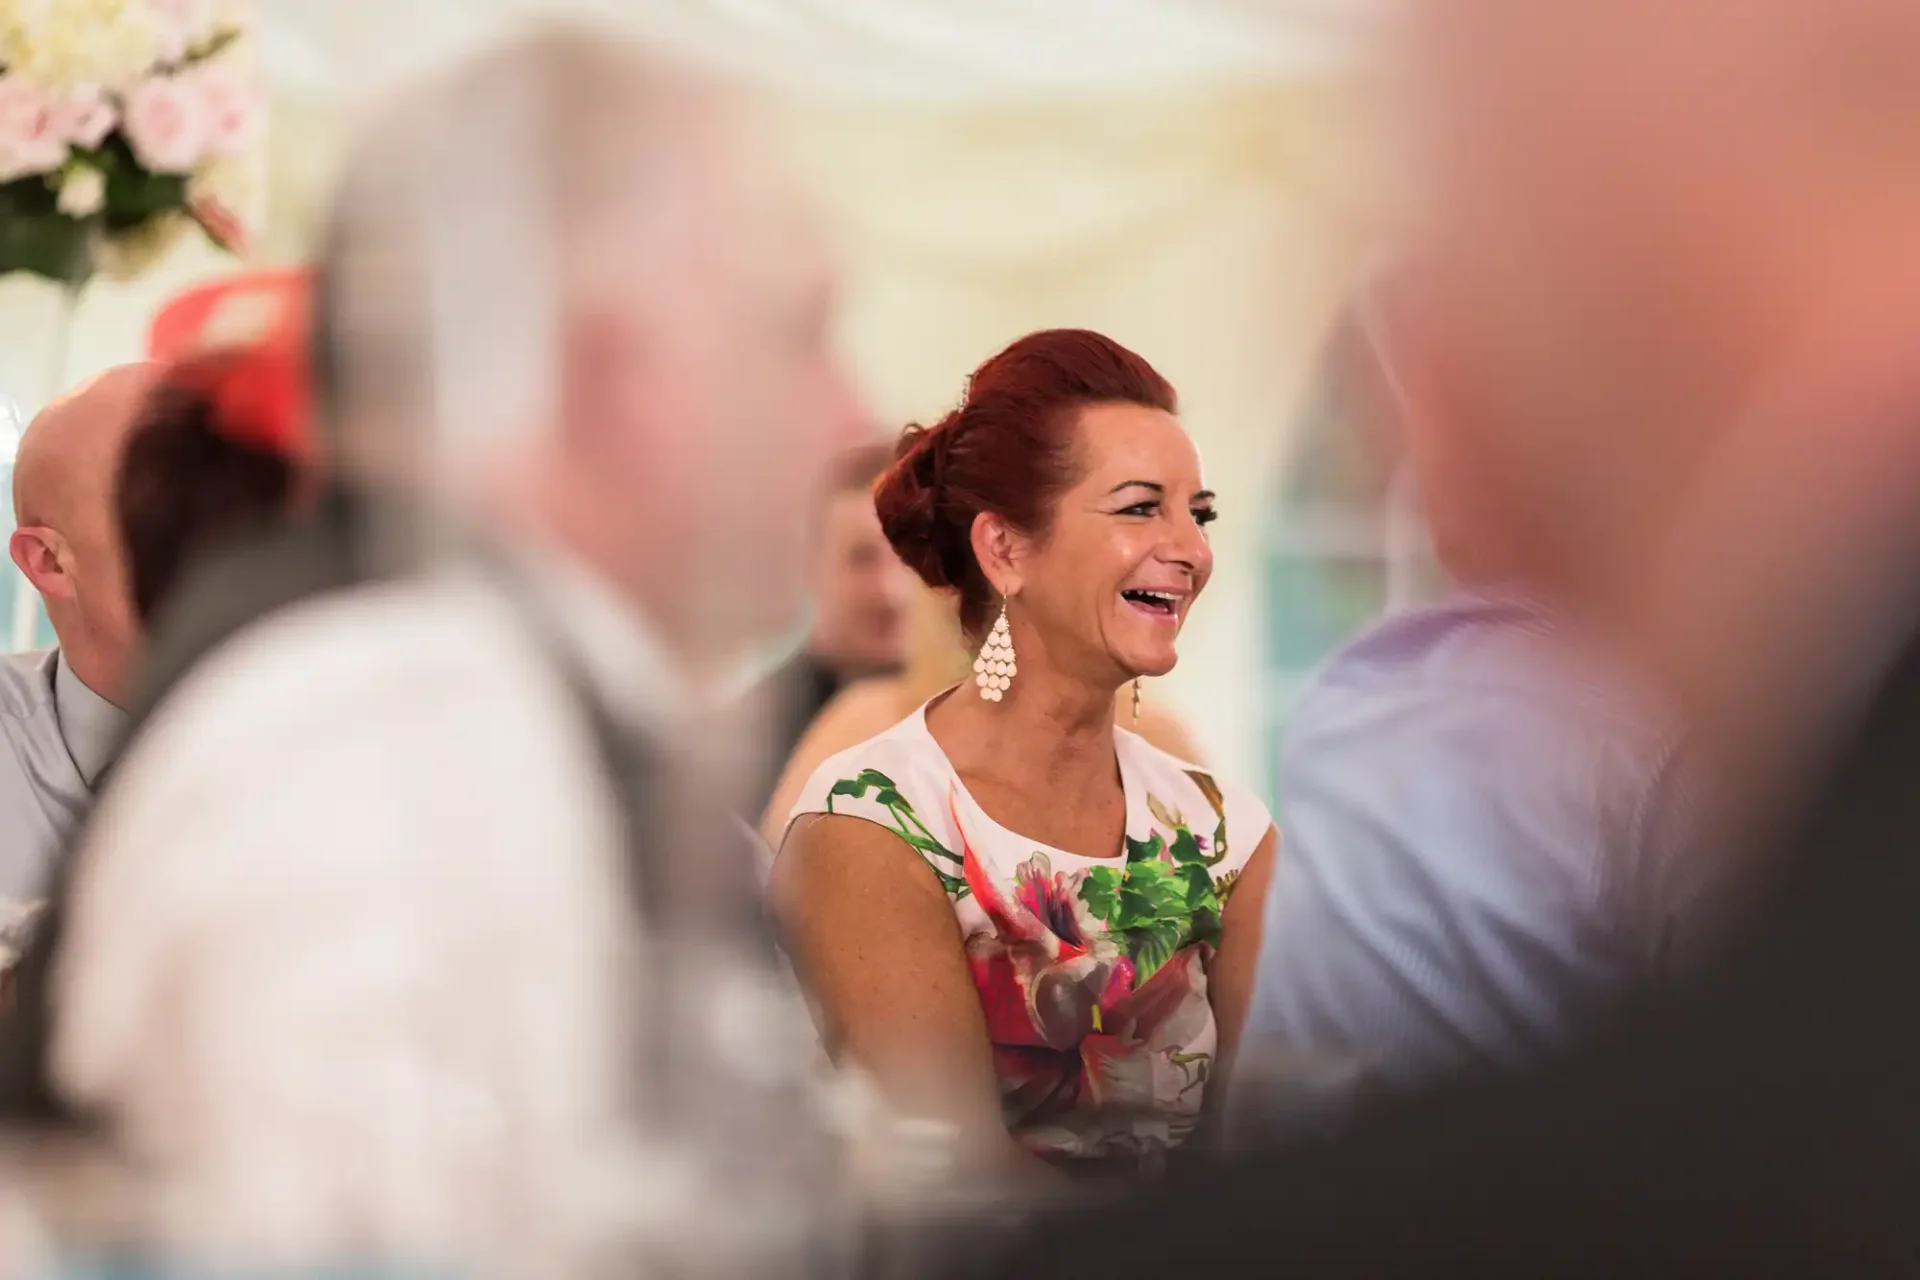 Woman with red hair laughing at a table during an event, surrounded by guests in soft focus.